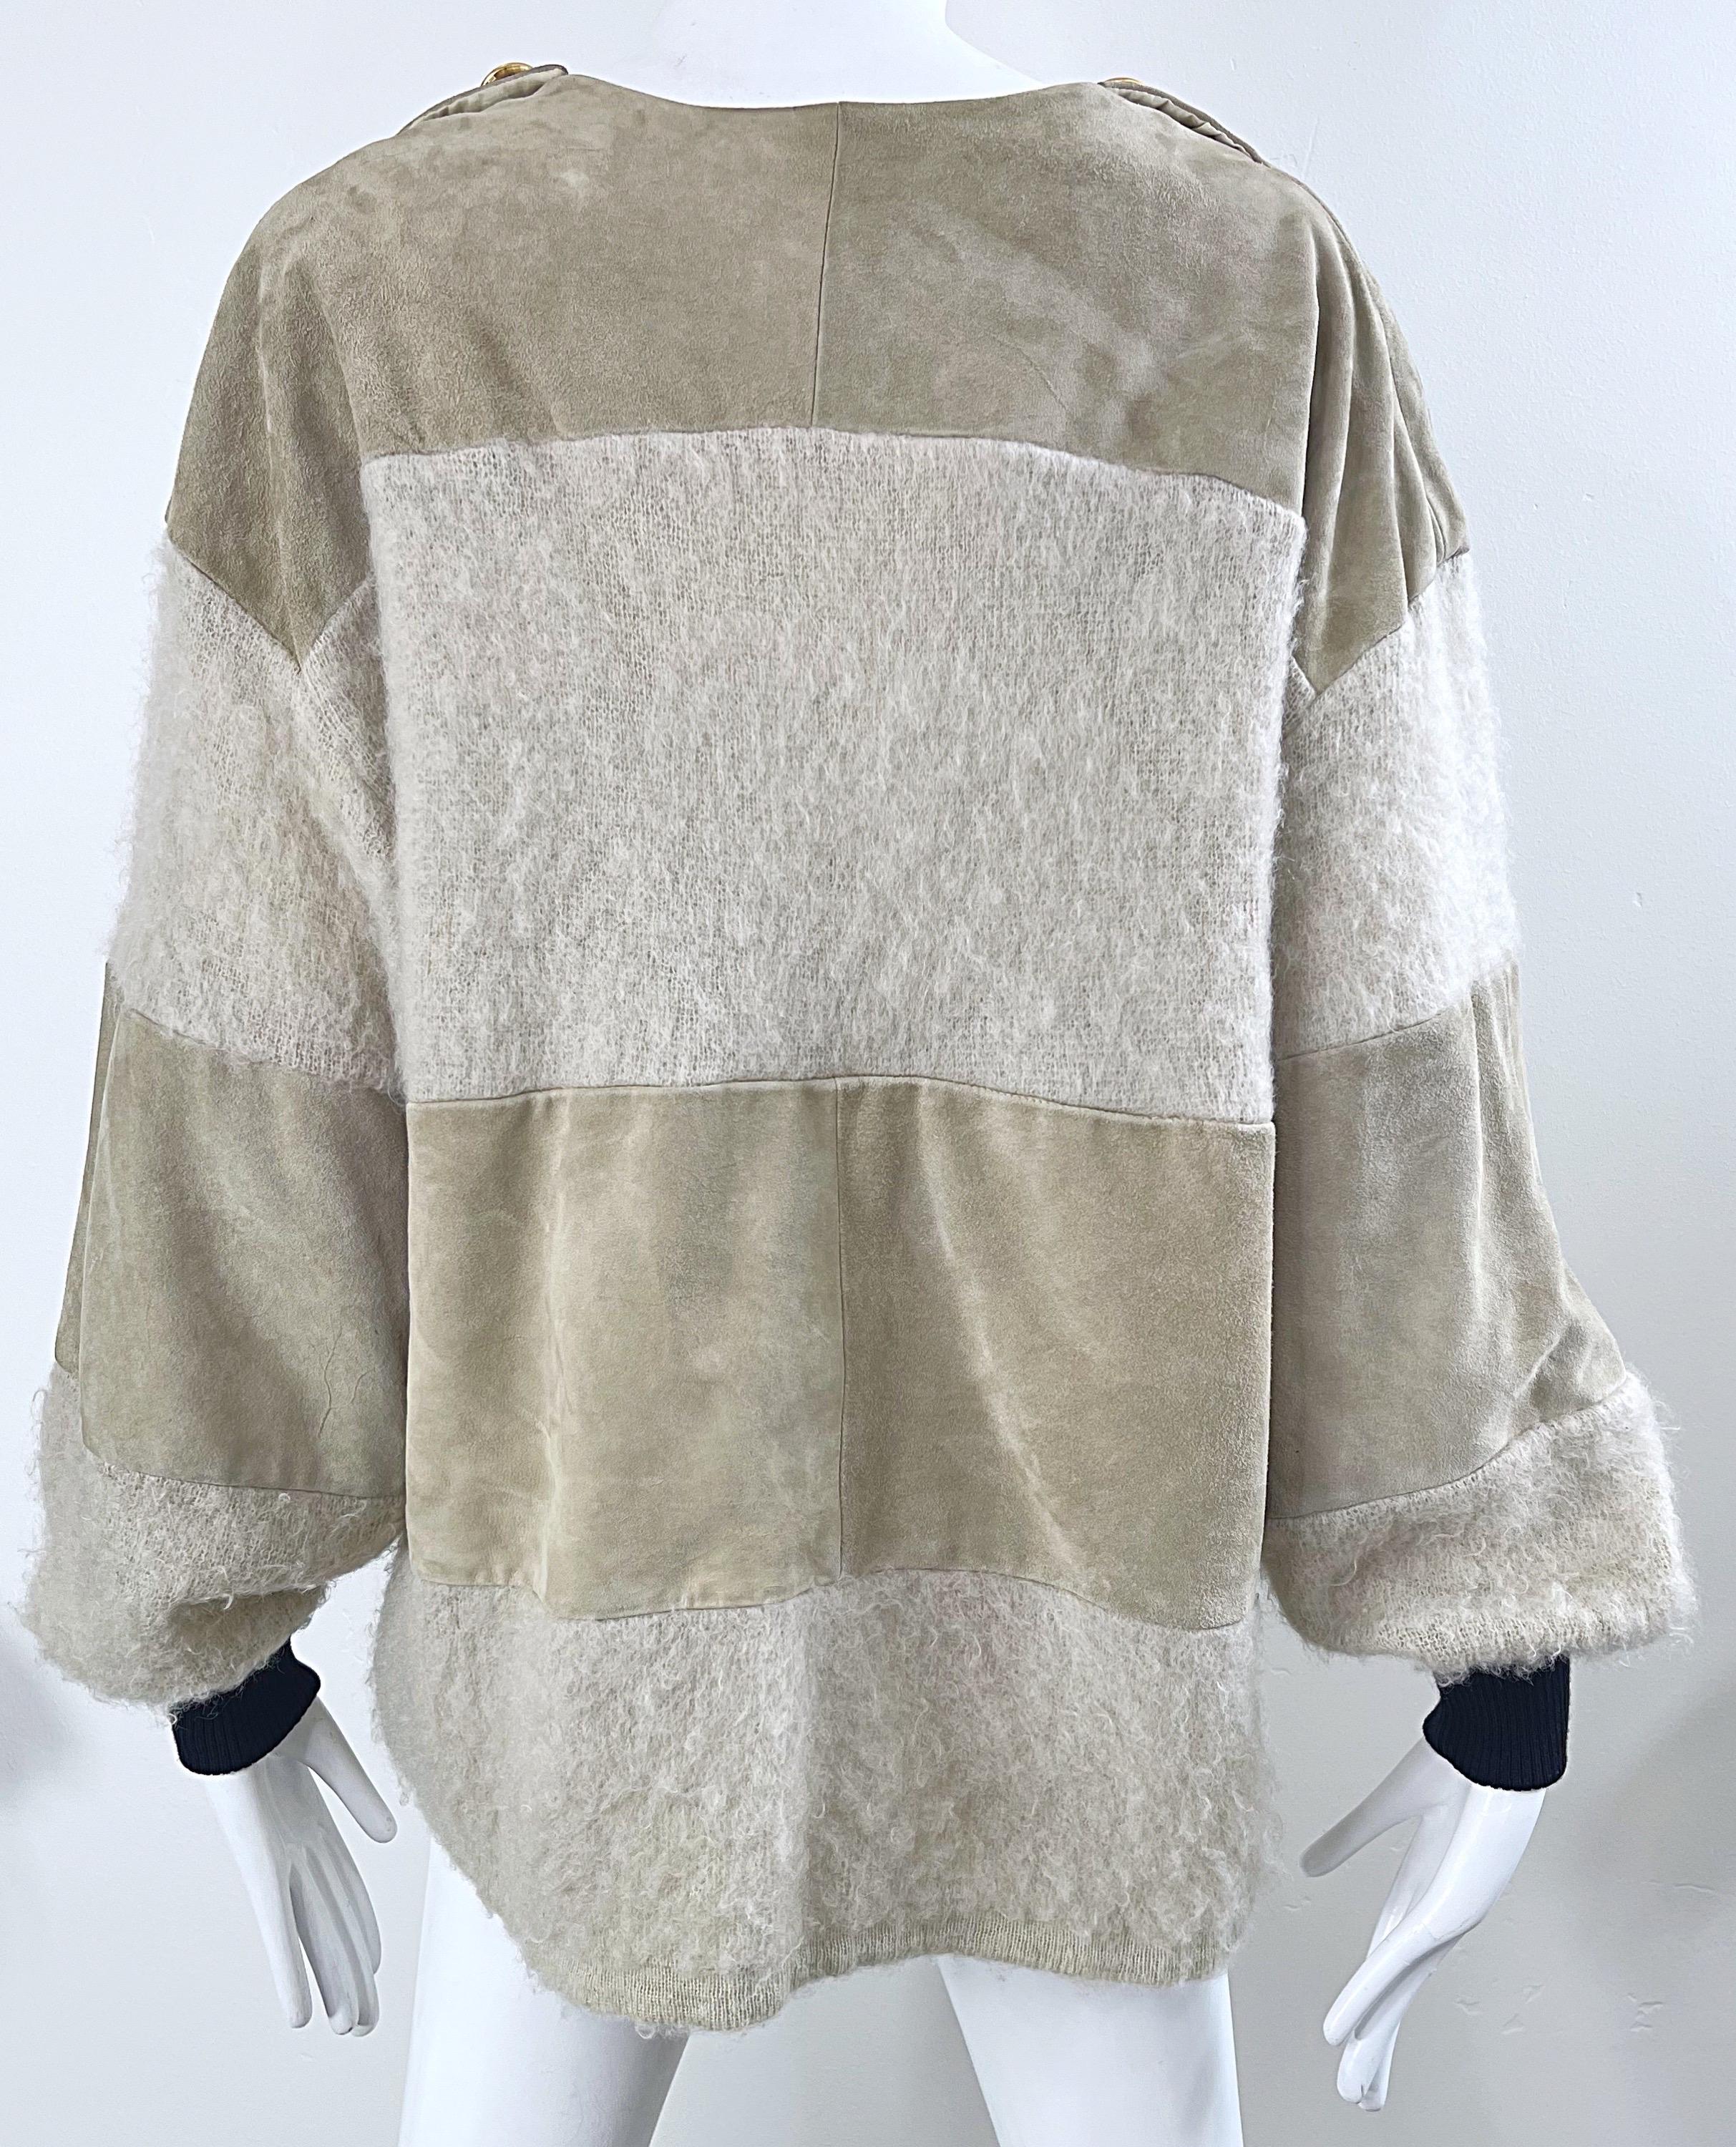 Gianfranco Ferre 1990s Leather Suede + Mohair Tan Nude Vintage 90s Sweater Top For Sale 3